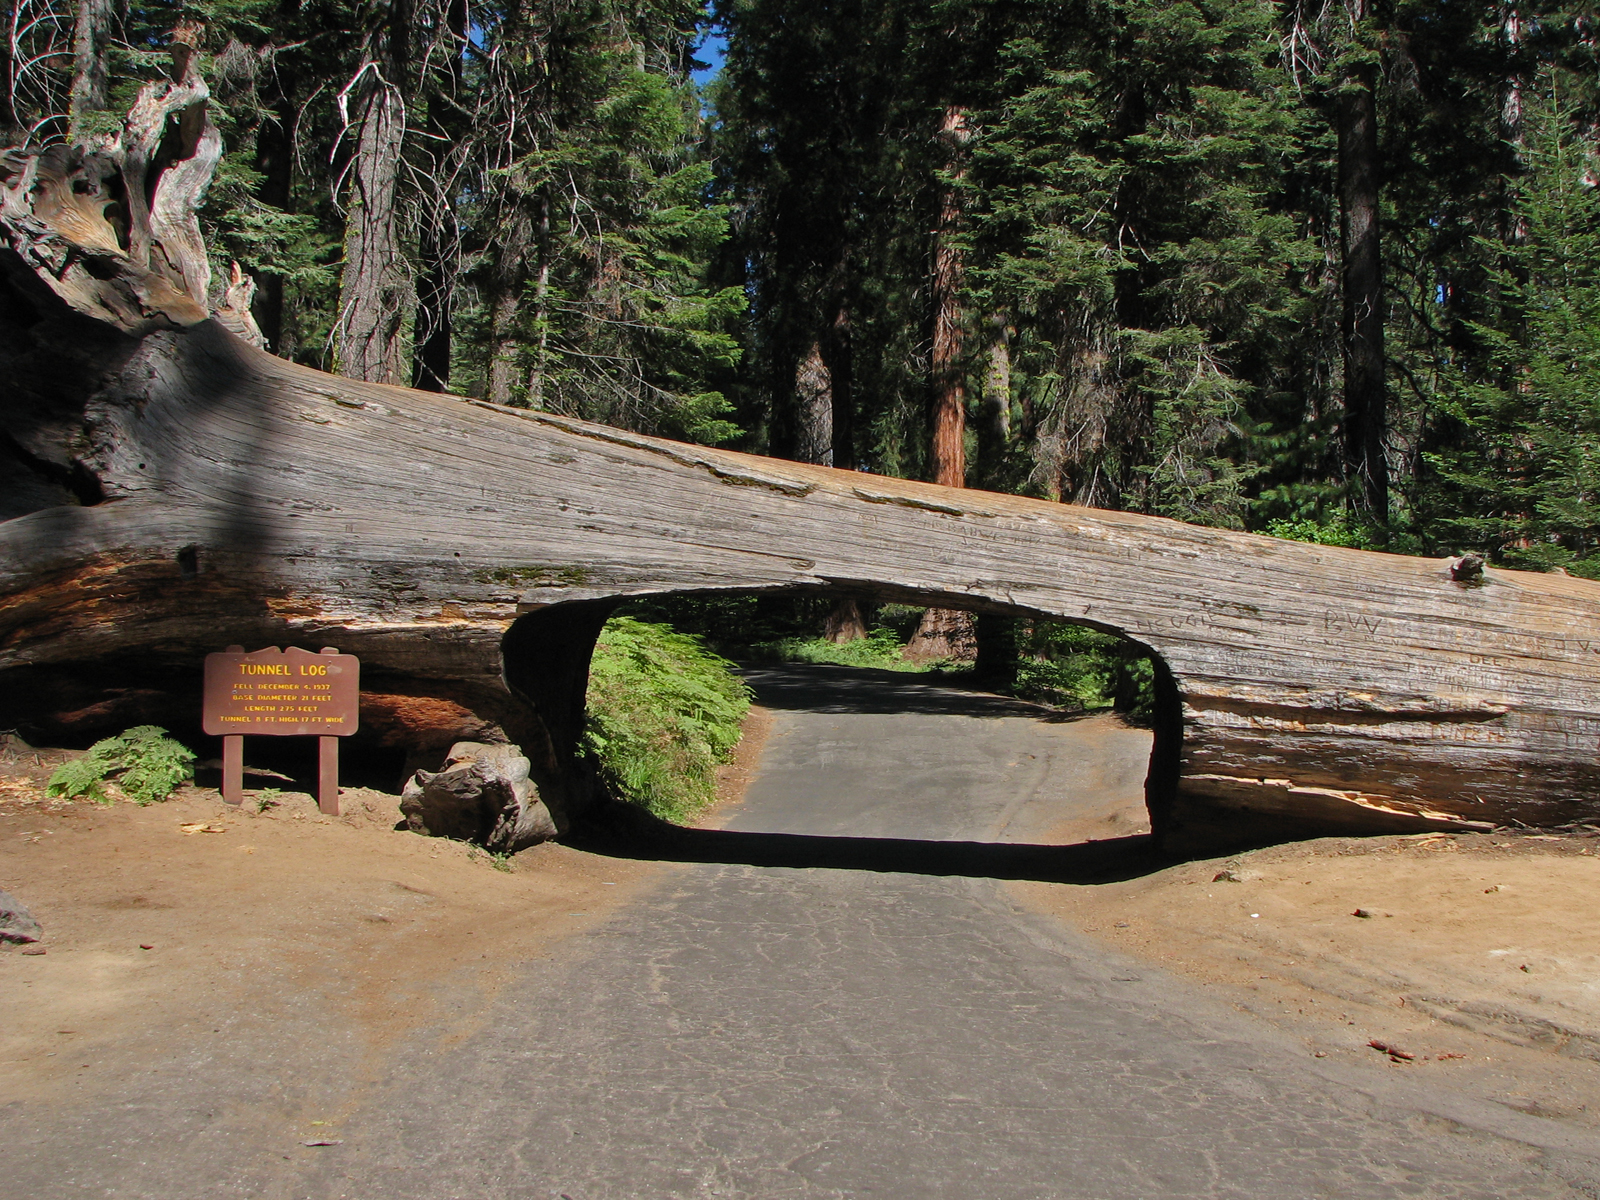 Tunnel log in sequoia national park photo